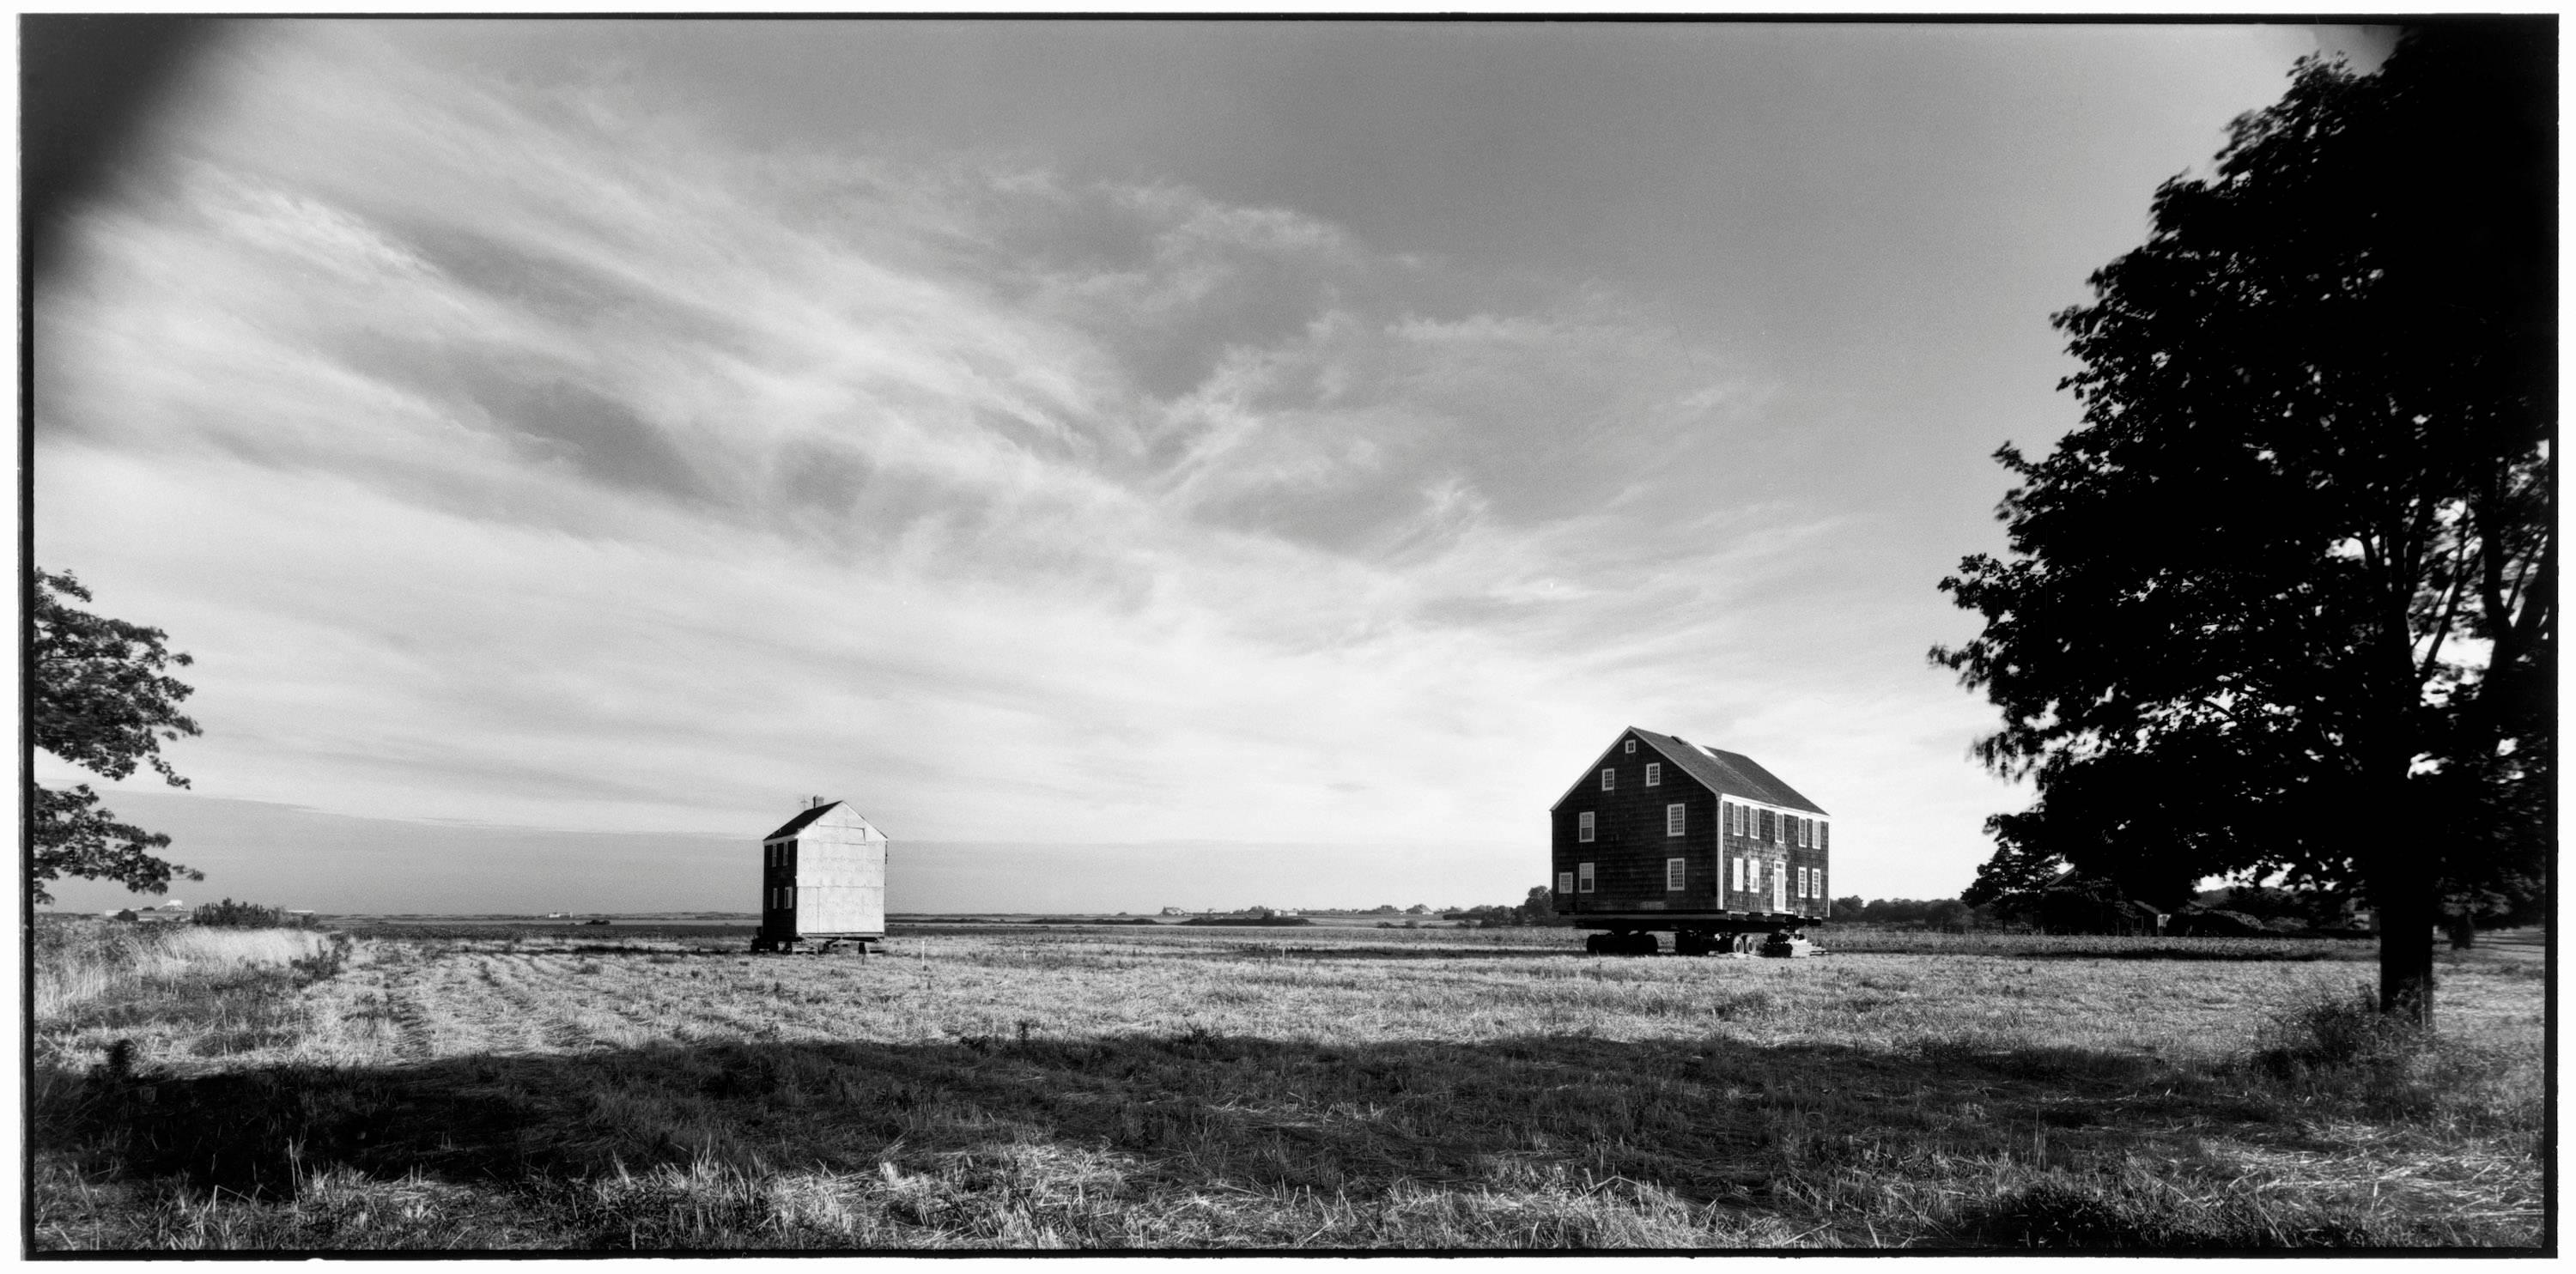 Bridgehampton, New York, 1982 - Elliott Erwitt (Black and White Photography)
Signed, inscribed with title and dated on accompanying artist’s label
Silver gelatin print, printed later

Available in four sizes:
11 x 14 inches
16 x 20 inches
20 x 24